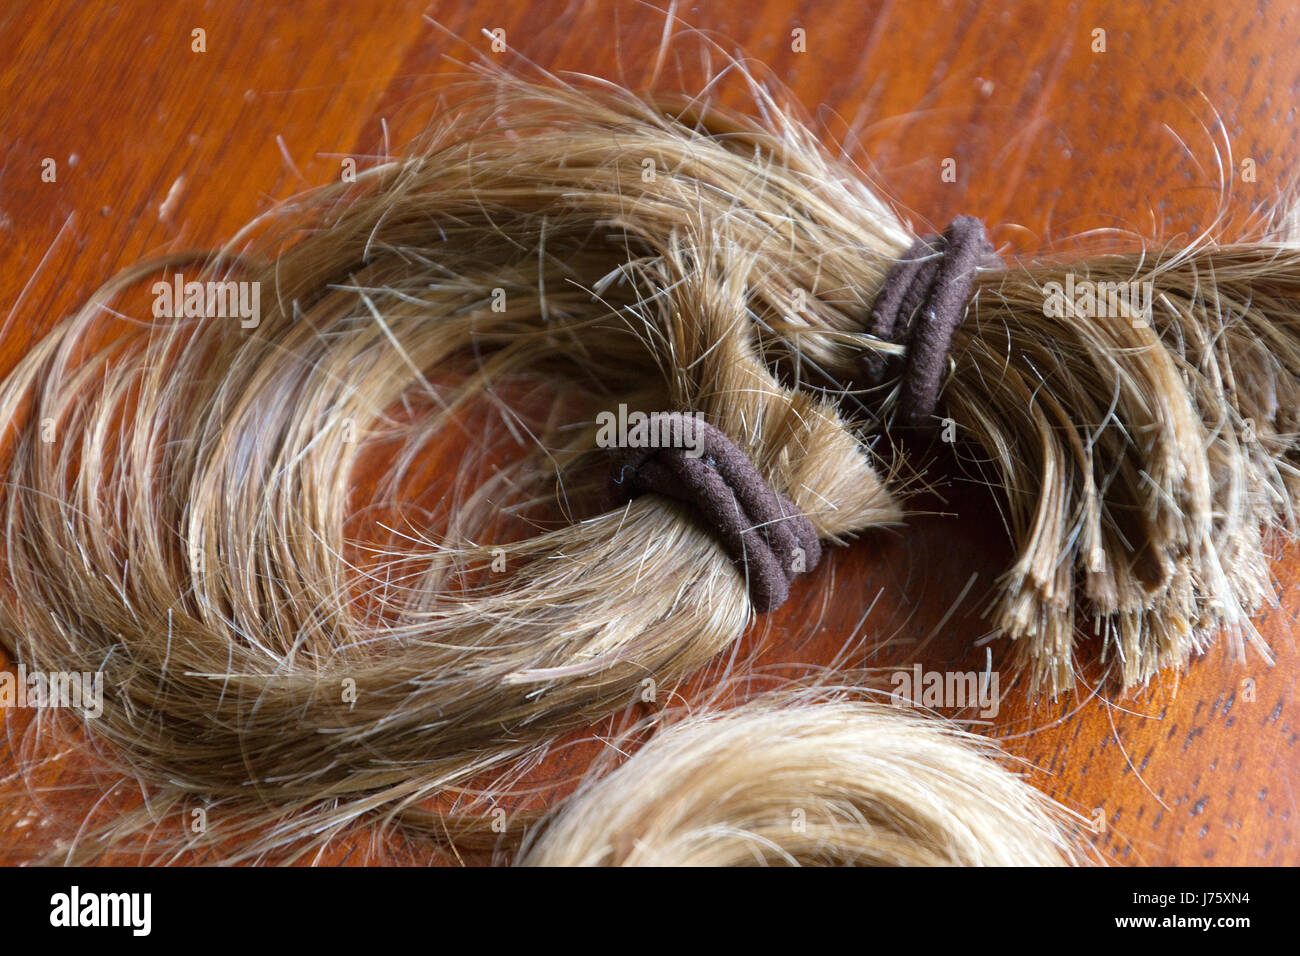 Close up of a thick, cut-off ponytail of long blond hair held together with brown hair ties Stock Photo